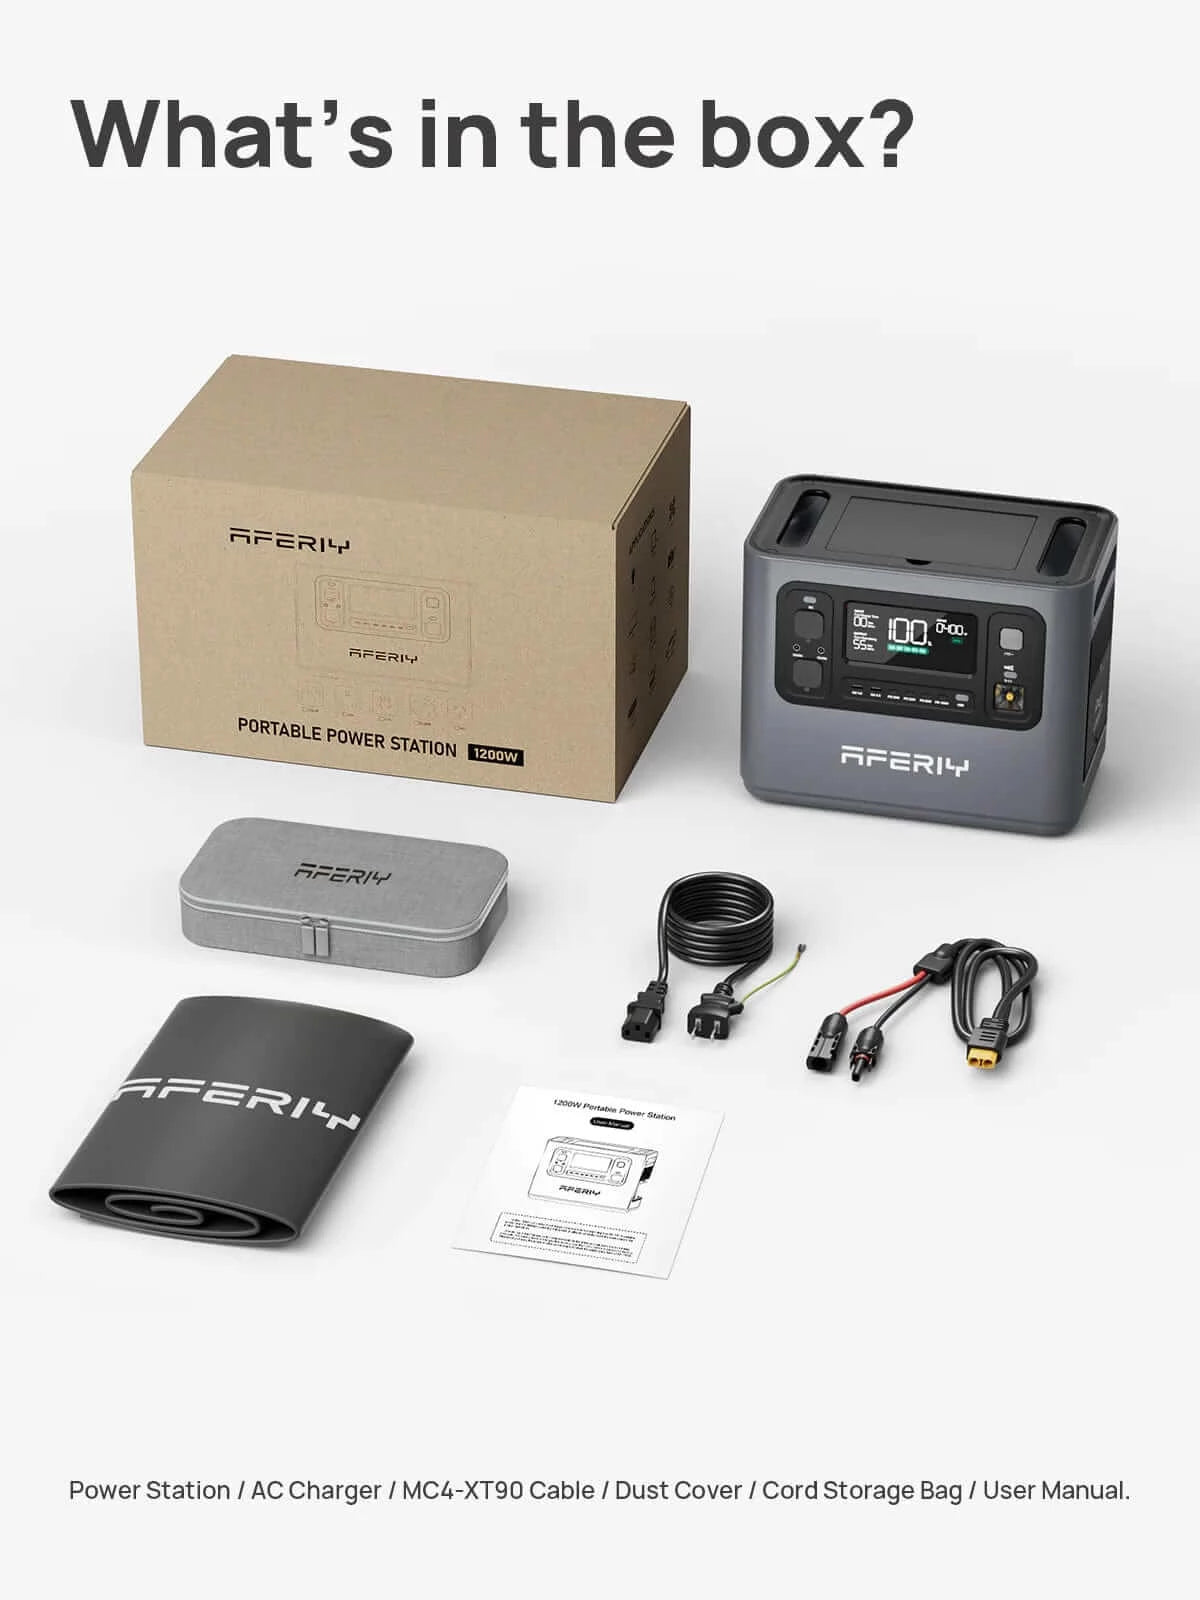 1200 Watt Portable Power Station - 1248Wh: AFERIY P110 - What's In The Box